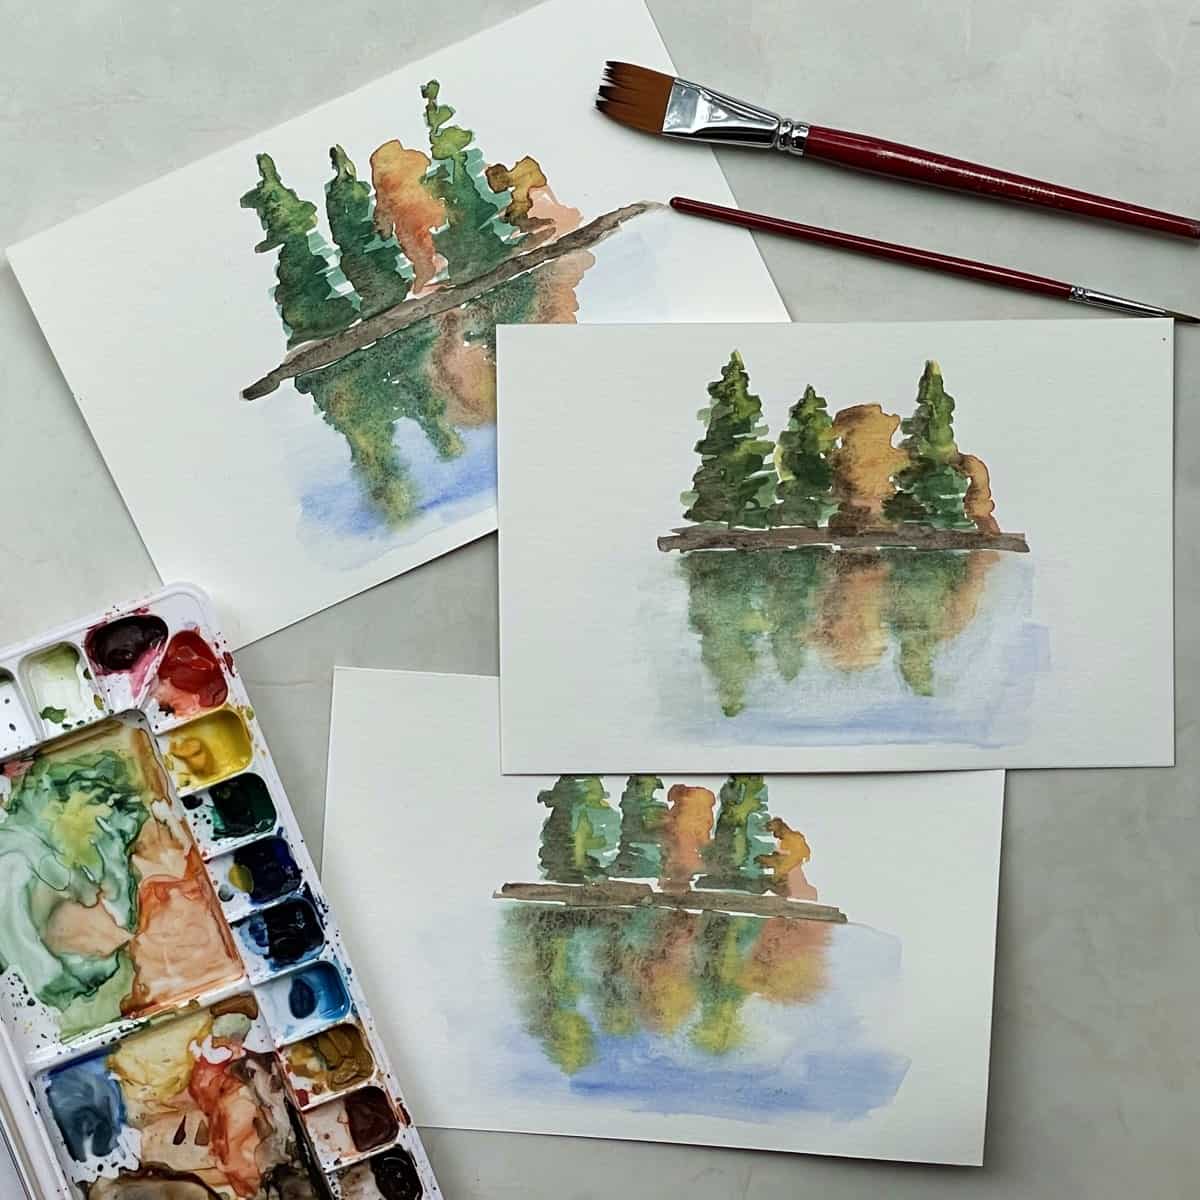 Three small watercolor paintings of reflections of trees on water next to paintbrushes and a watercolor paint set.